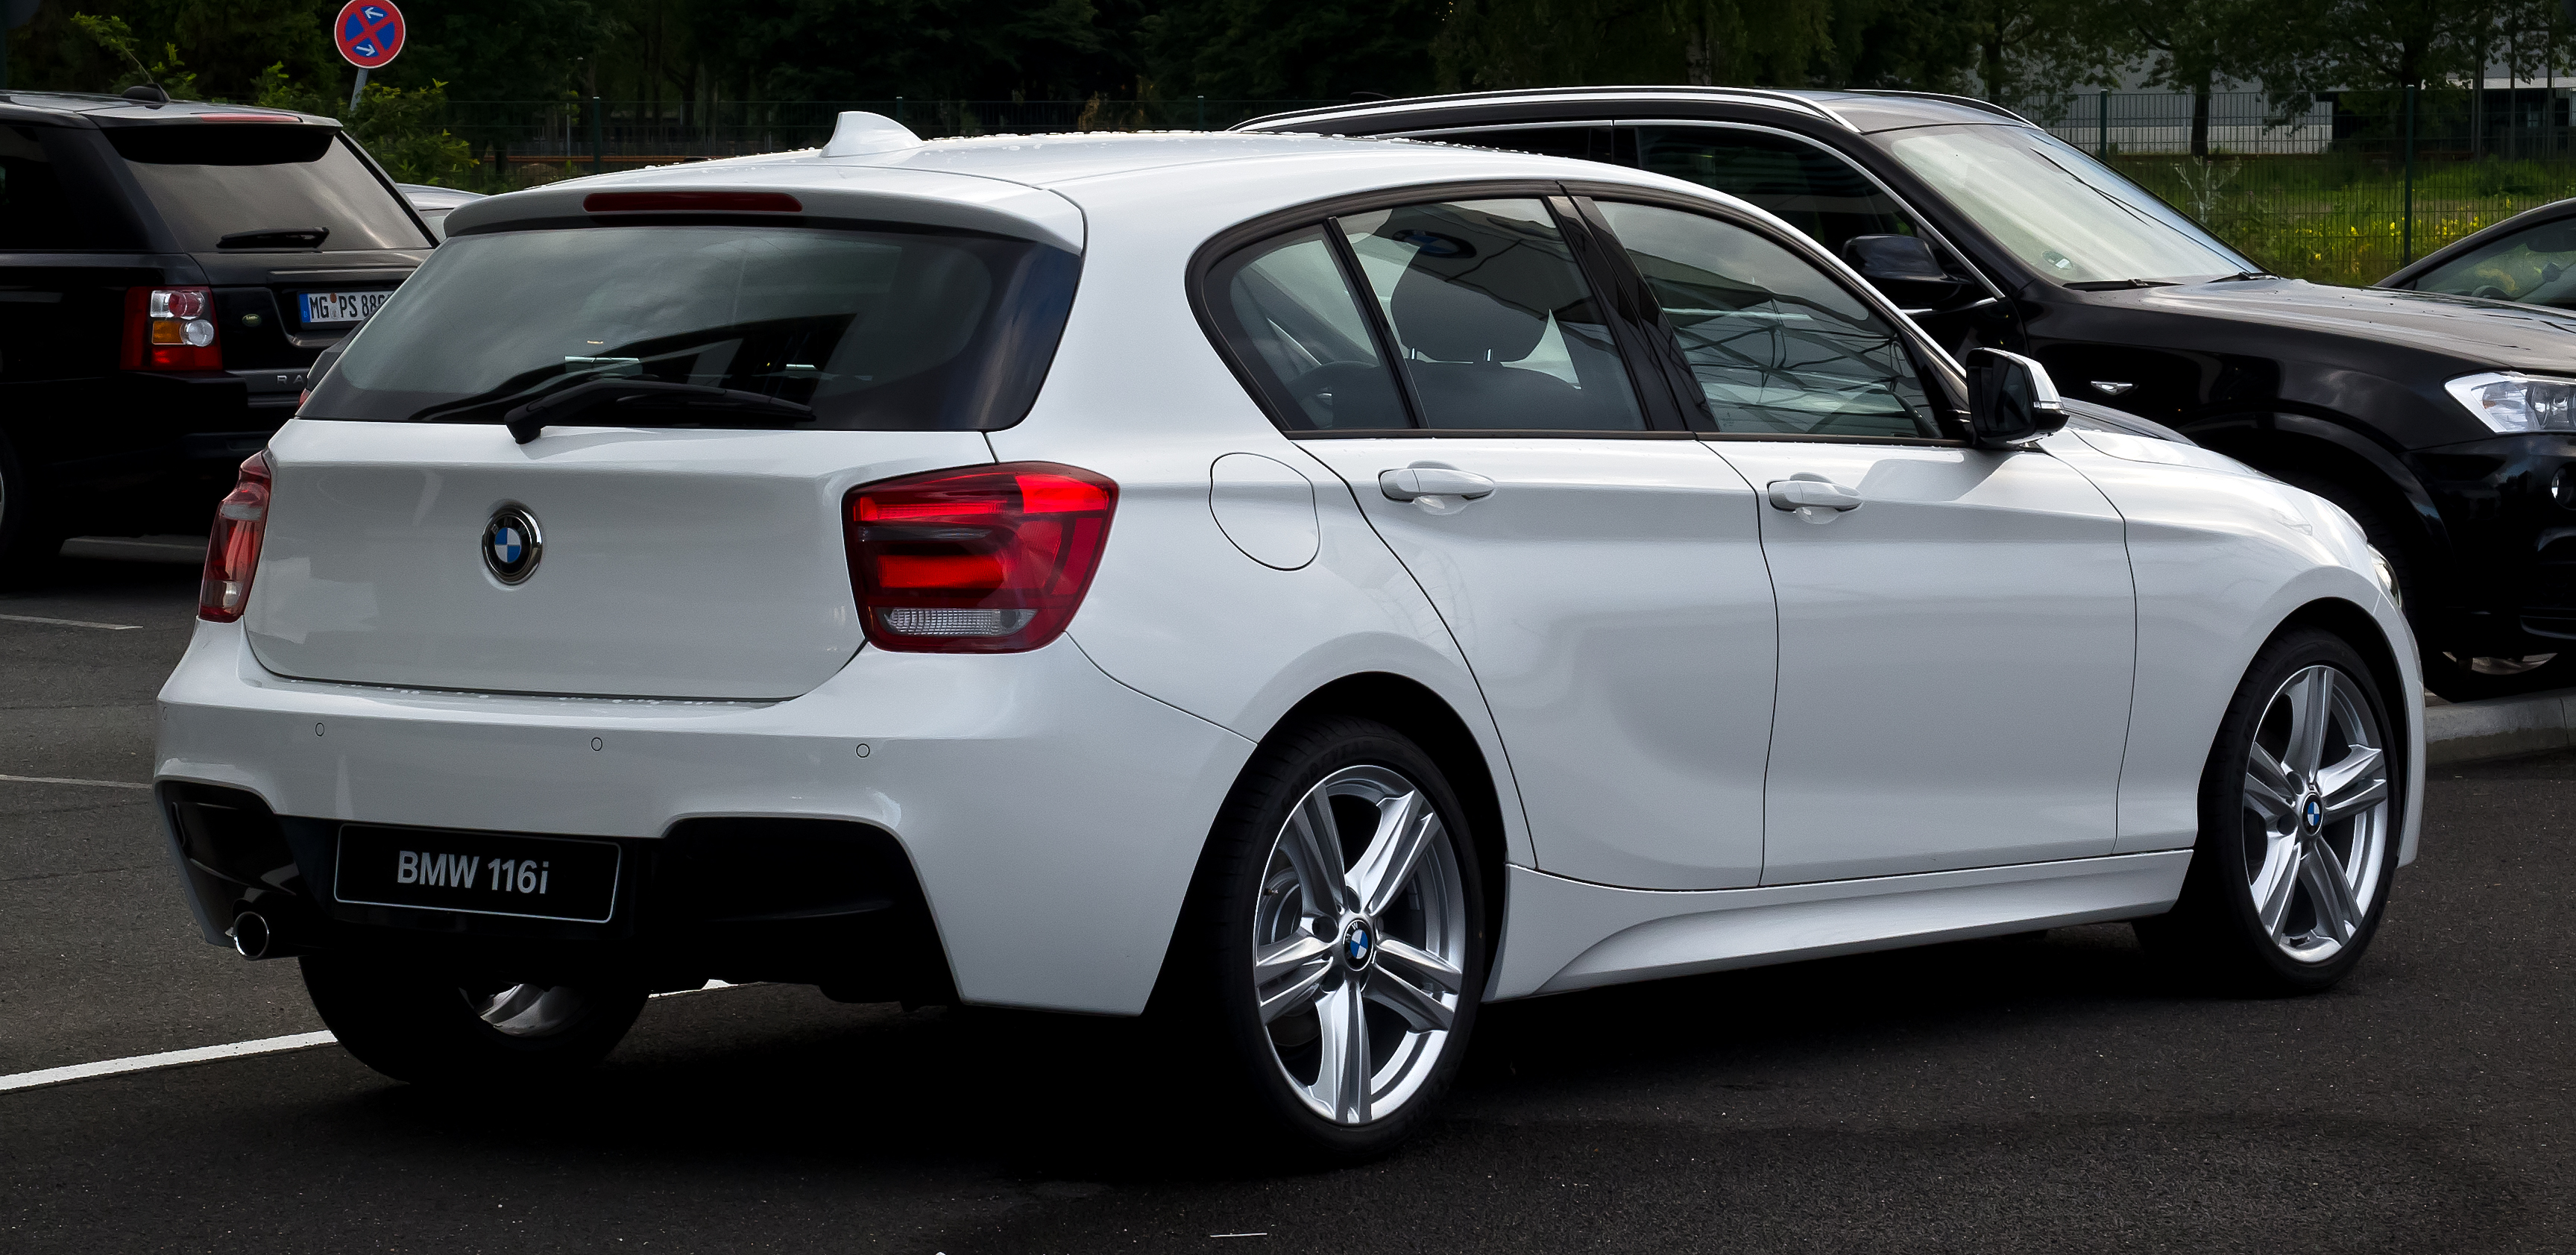 BMW 116 2015 Review, Amazing Pictures and Images Look